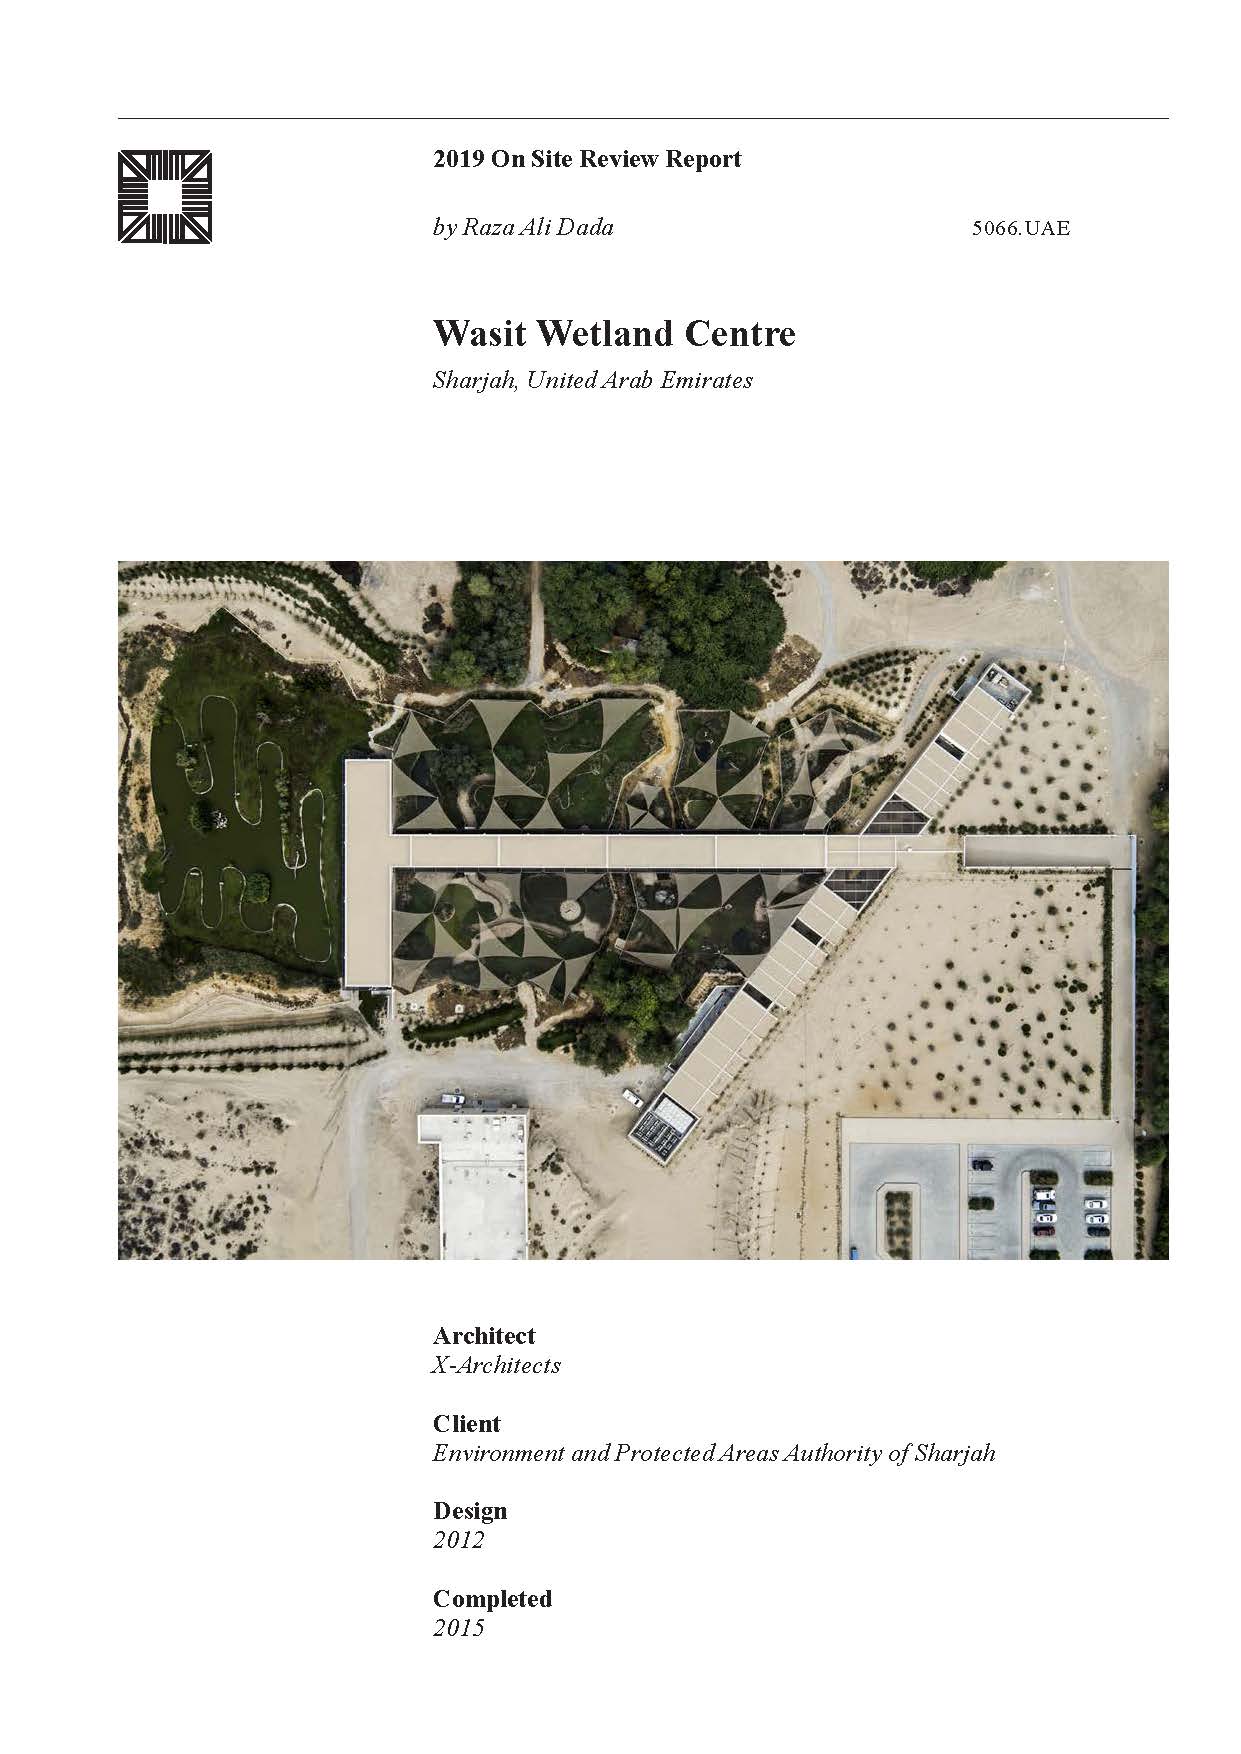 Wasit Wetland Centre On-site Review Report